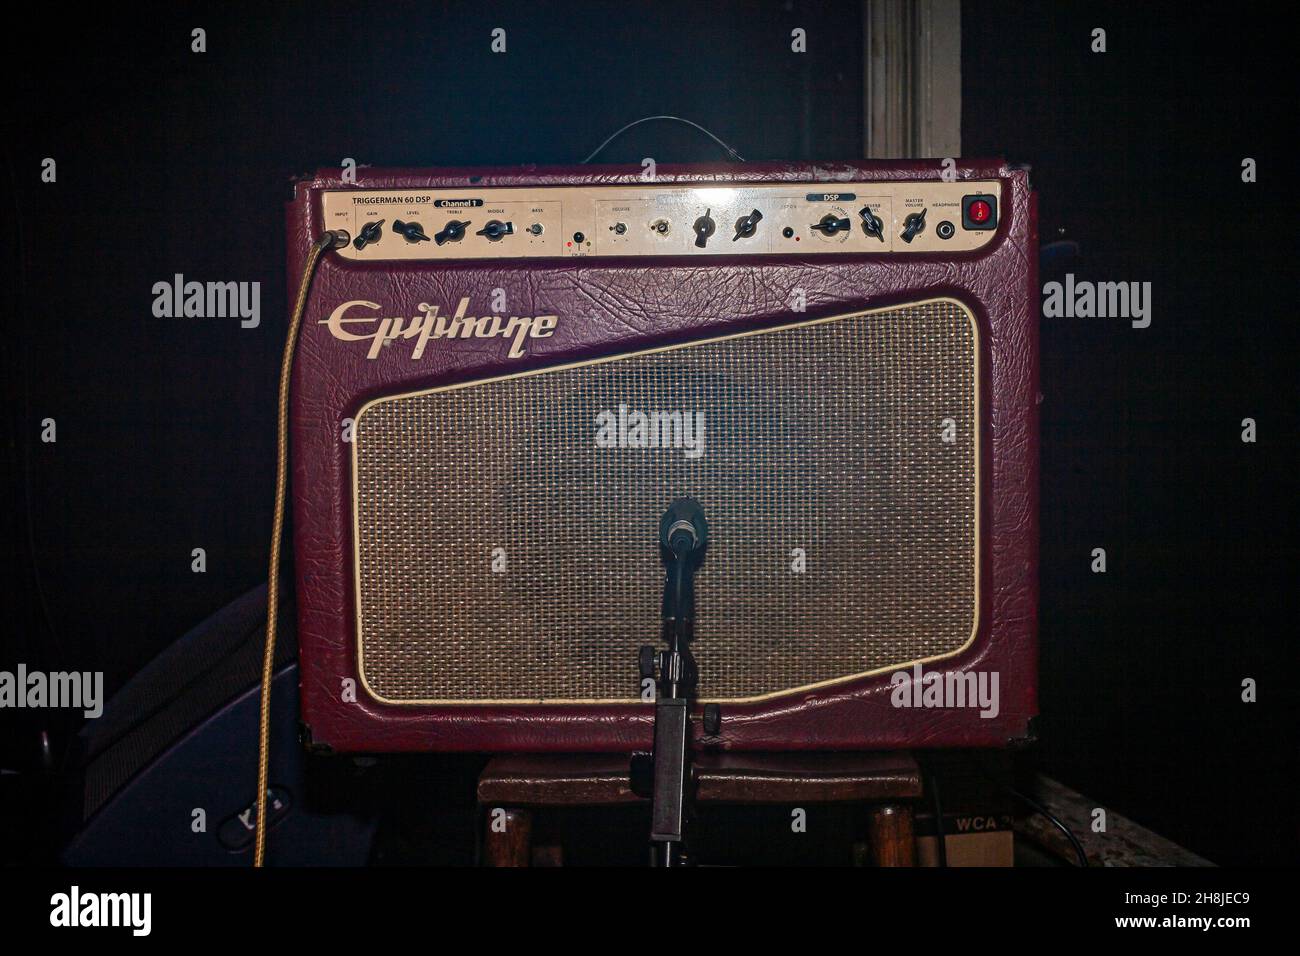 Epiphone vintage amplifier with microfone Stock Photo